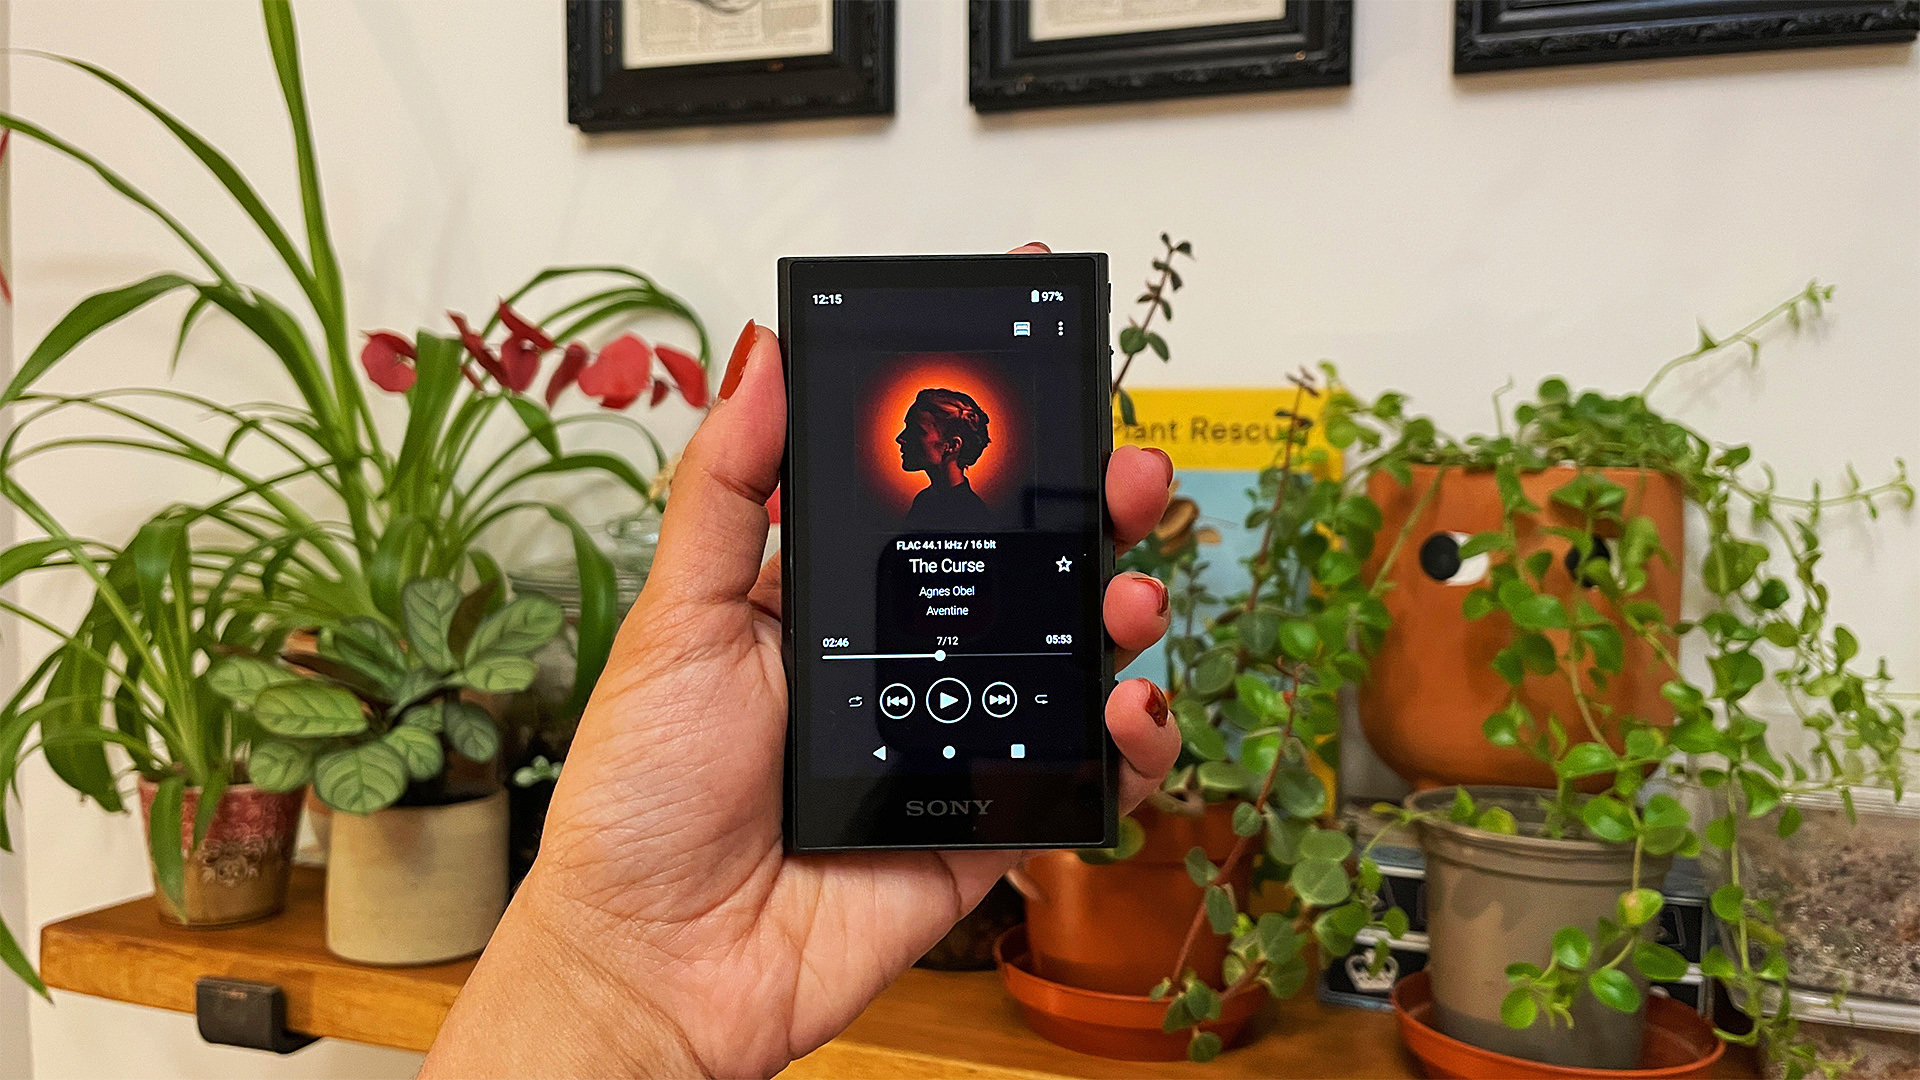 Sony NW-A306 review: an affordable Walkman that's appealing and